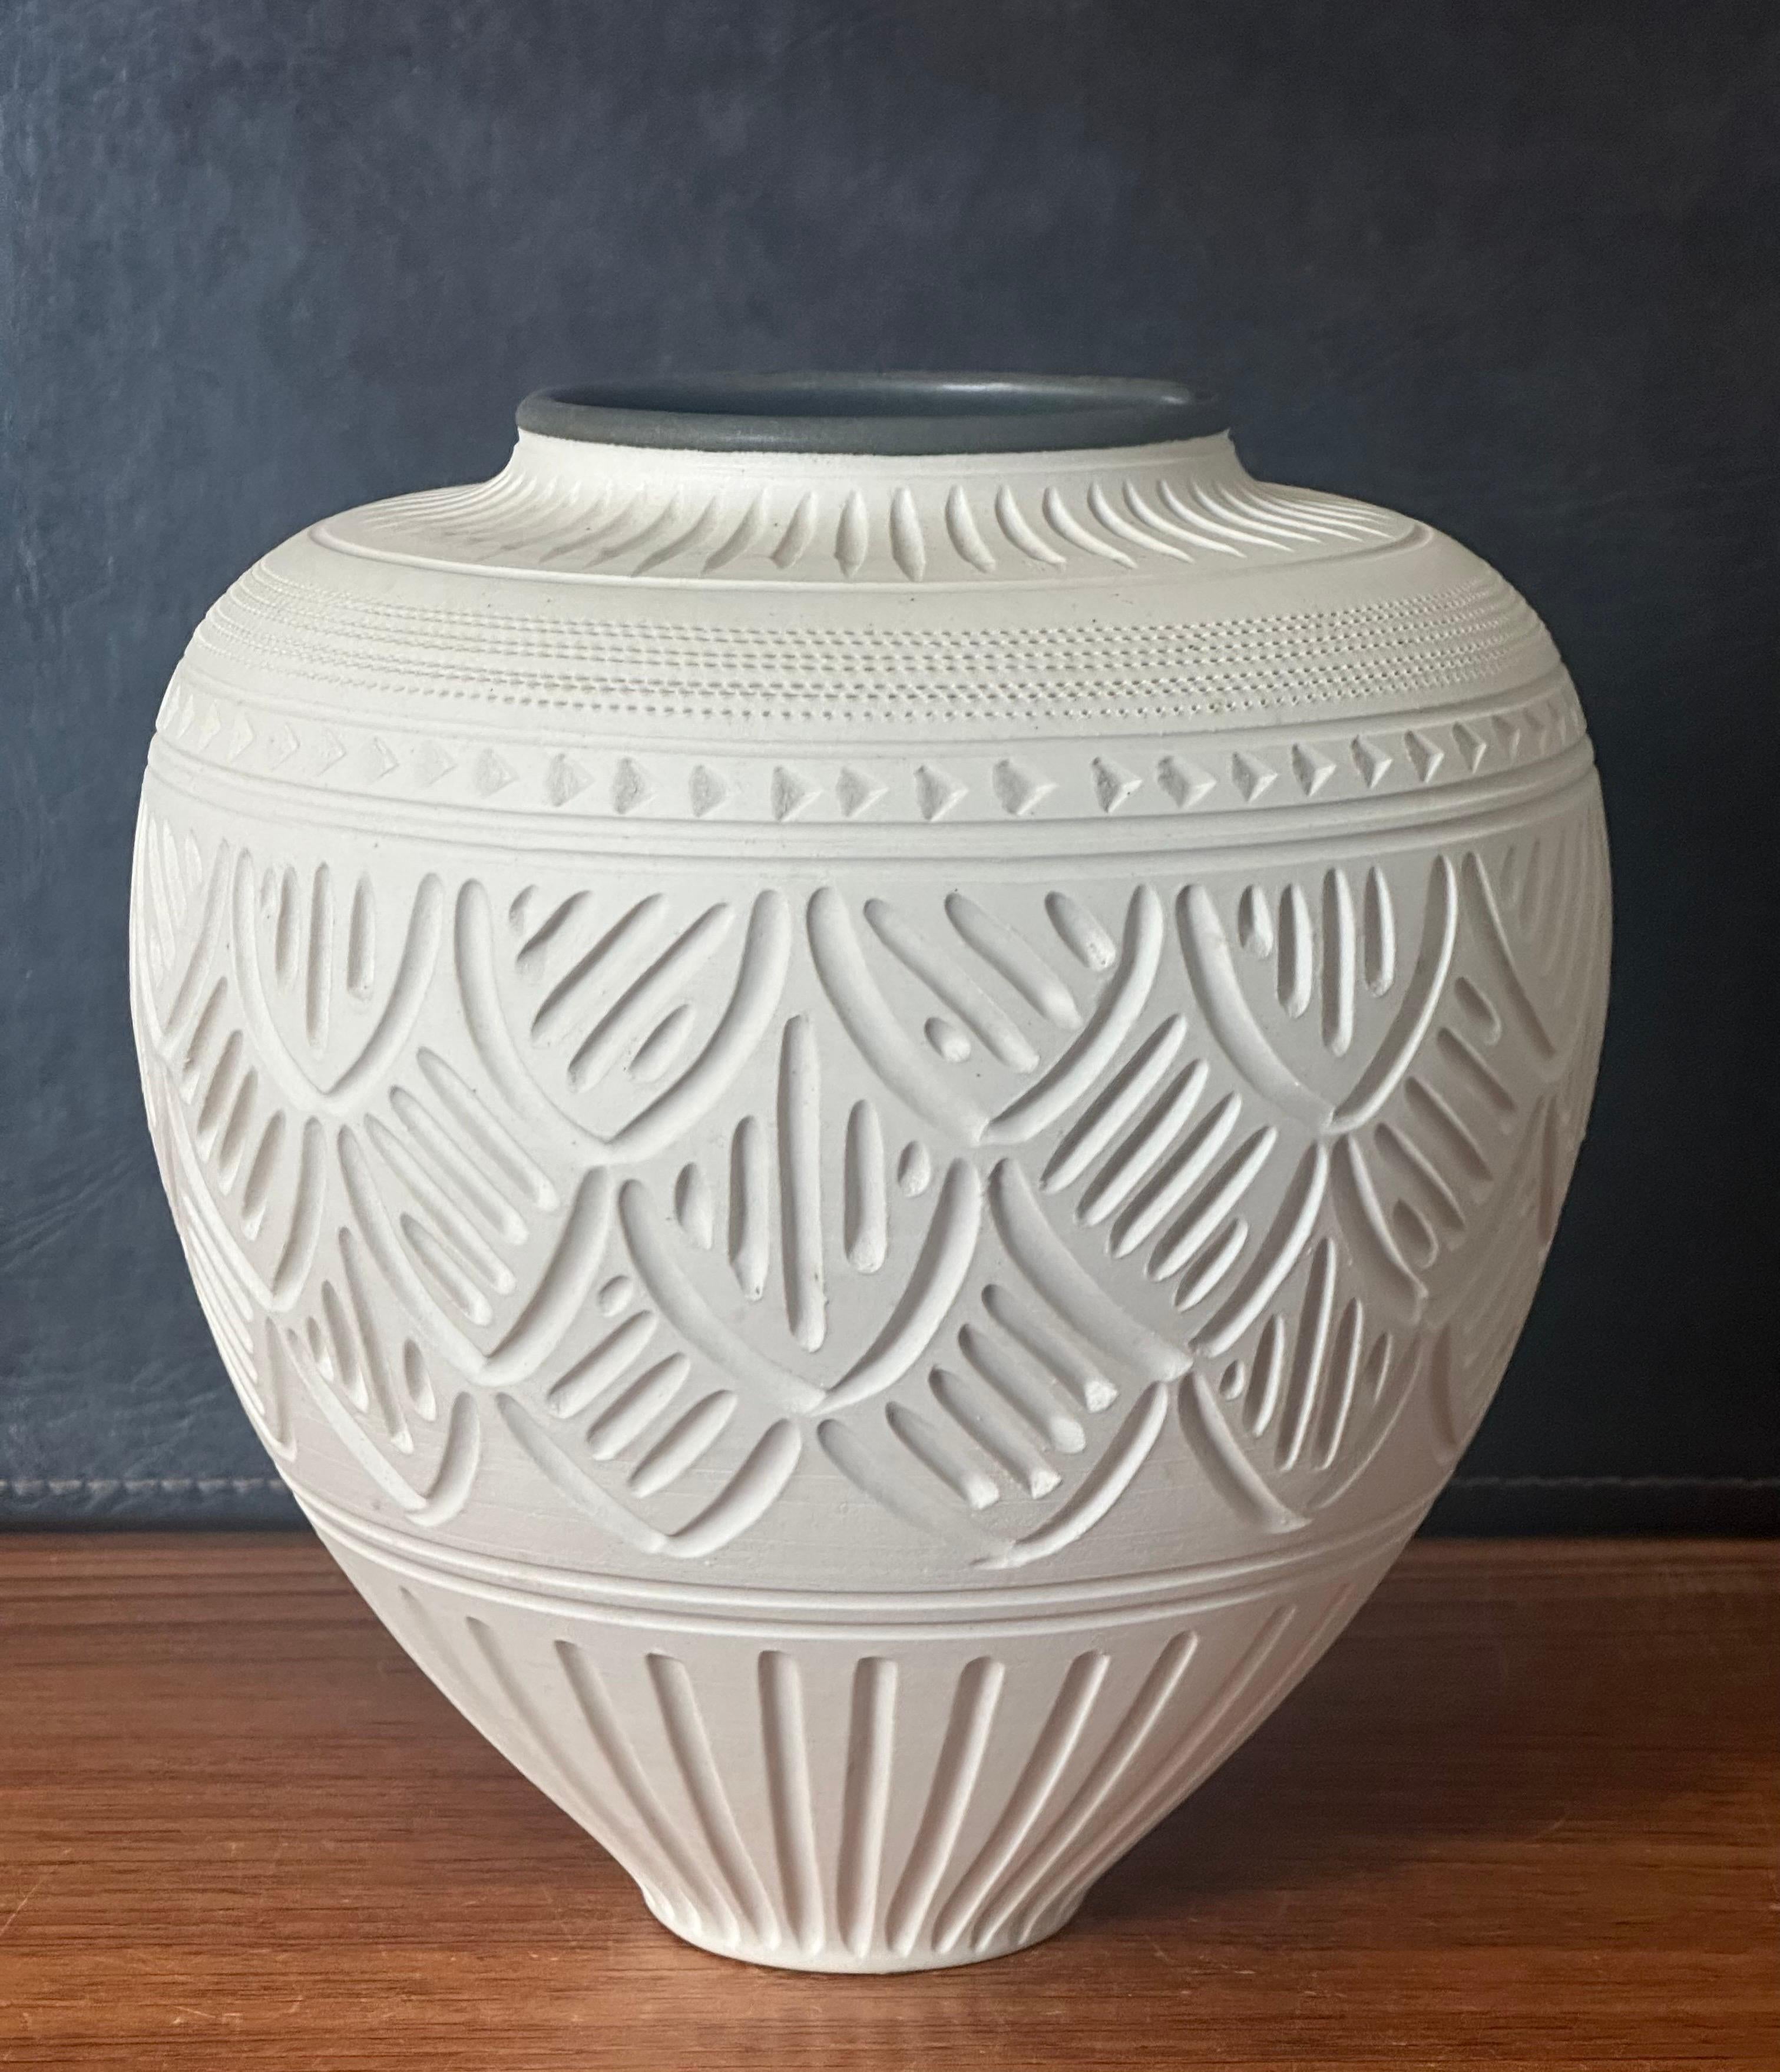 Incised Geometric Design Bisque Porcelain Vase by Nancy Smith For Sale 1